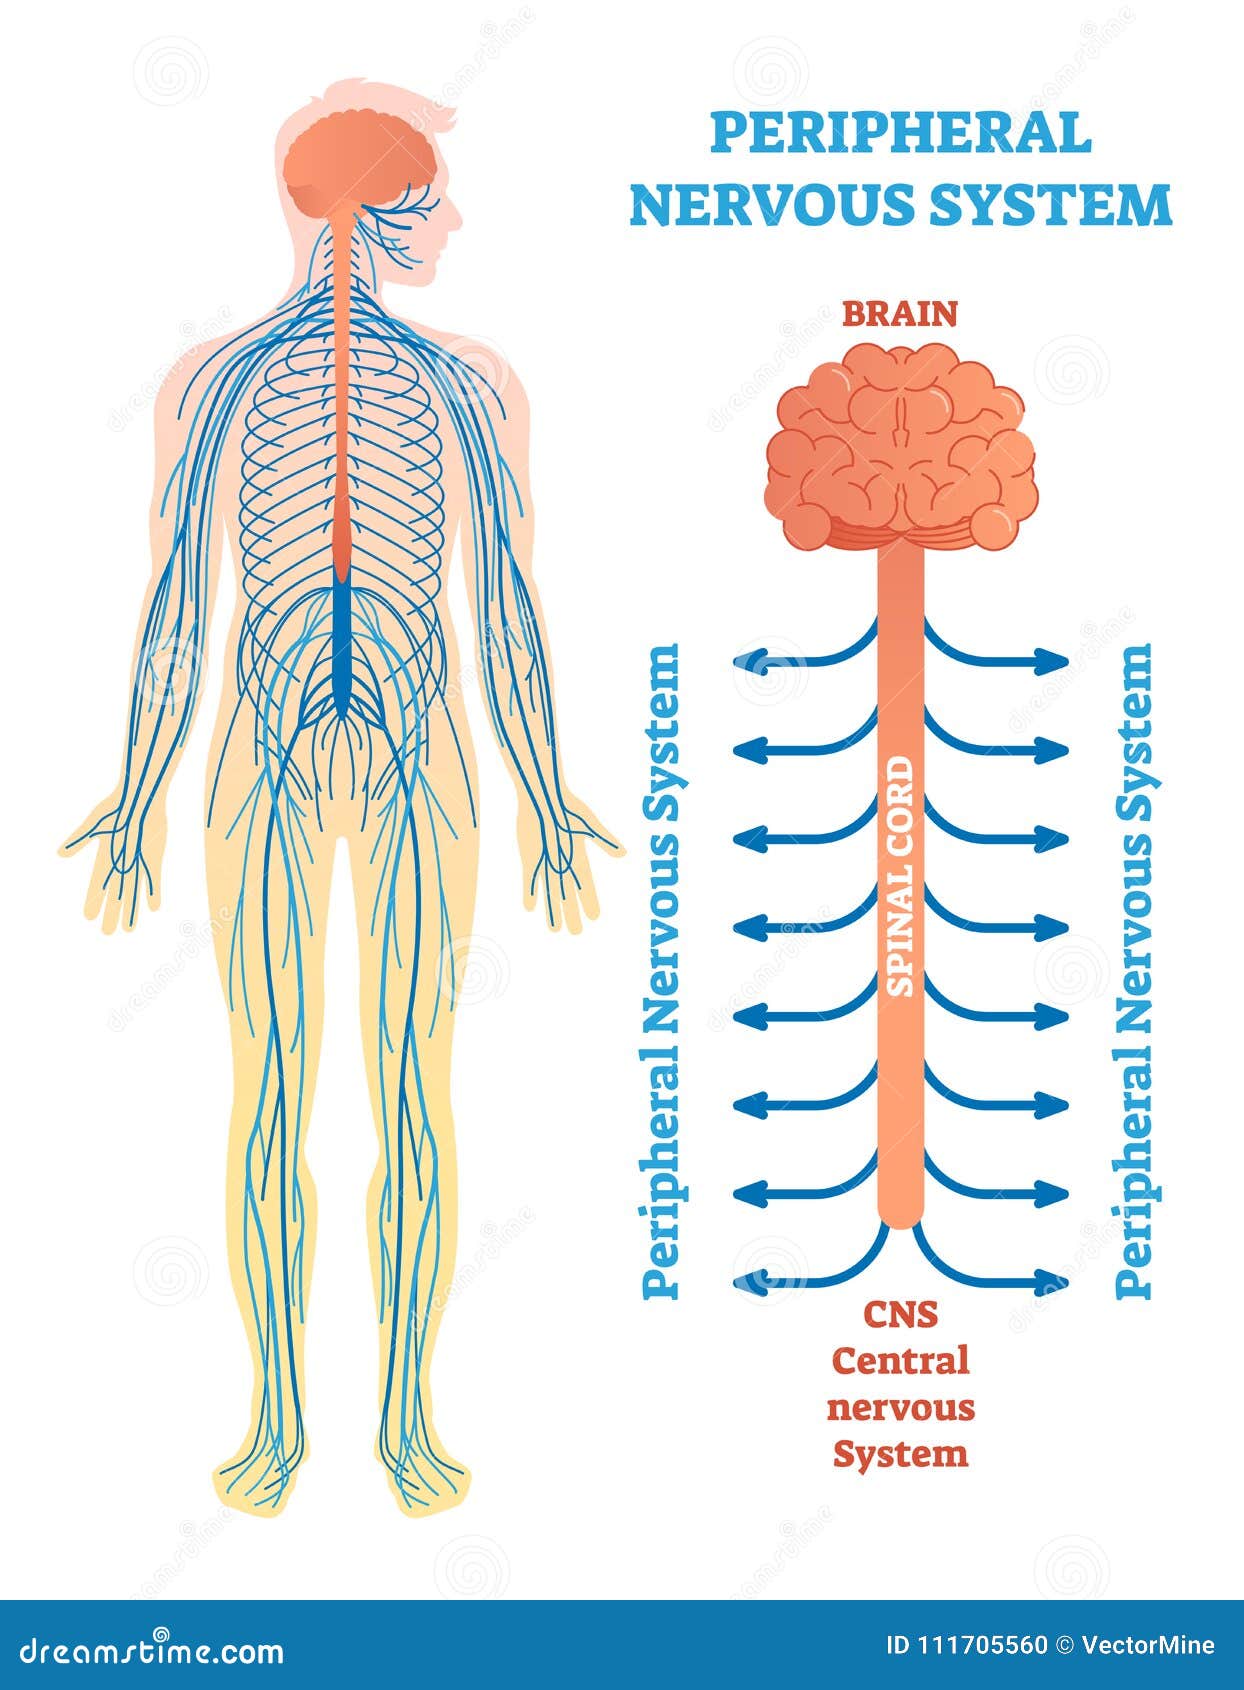 peripheral nervous system, medical   diagram with brain, spinal cord and nerves.